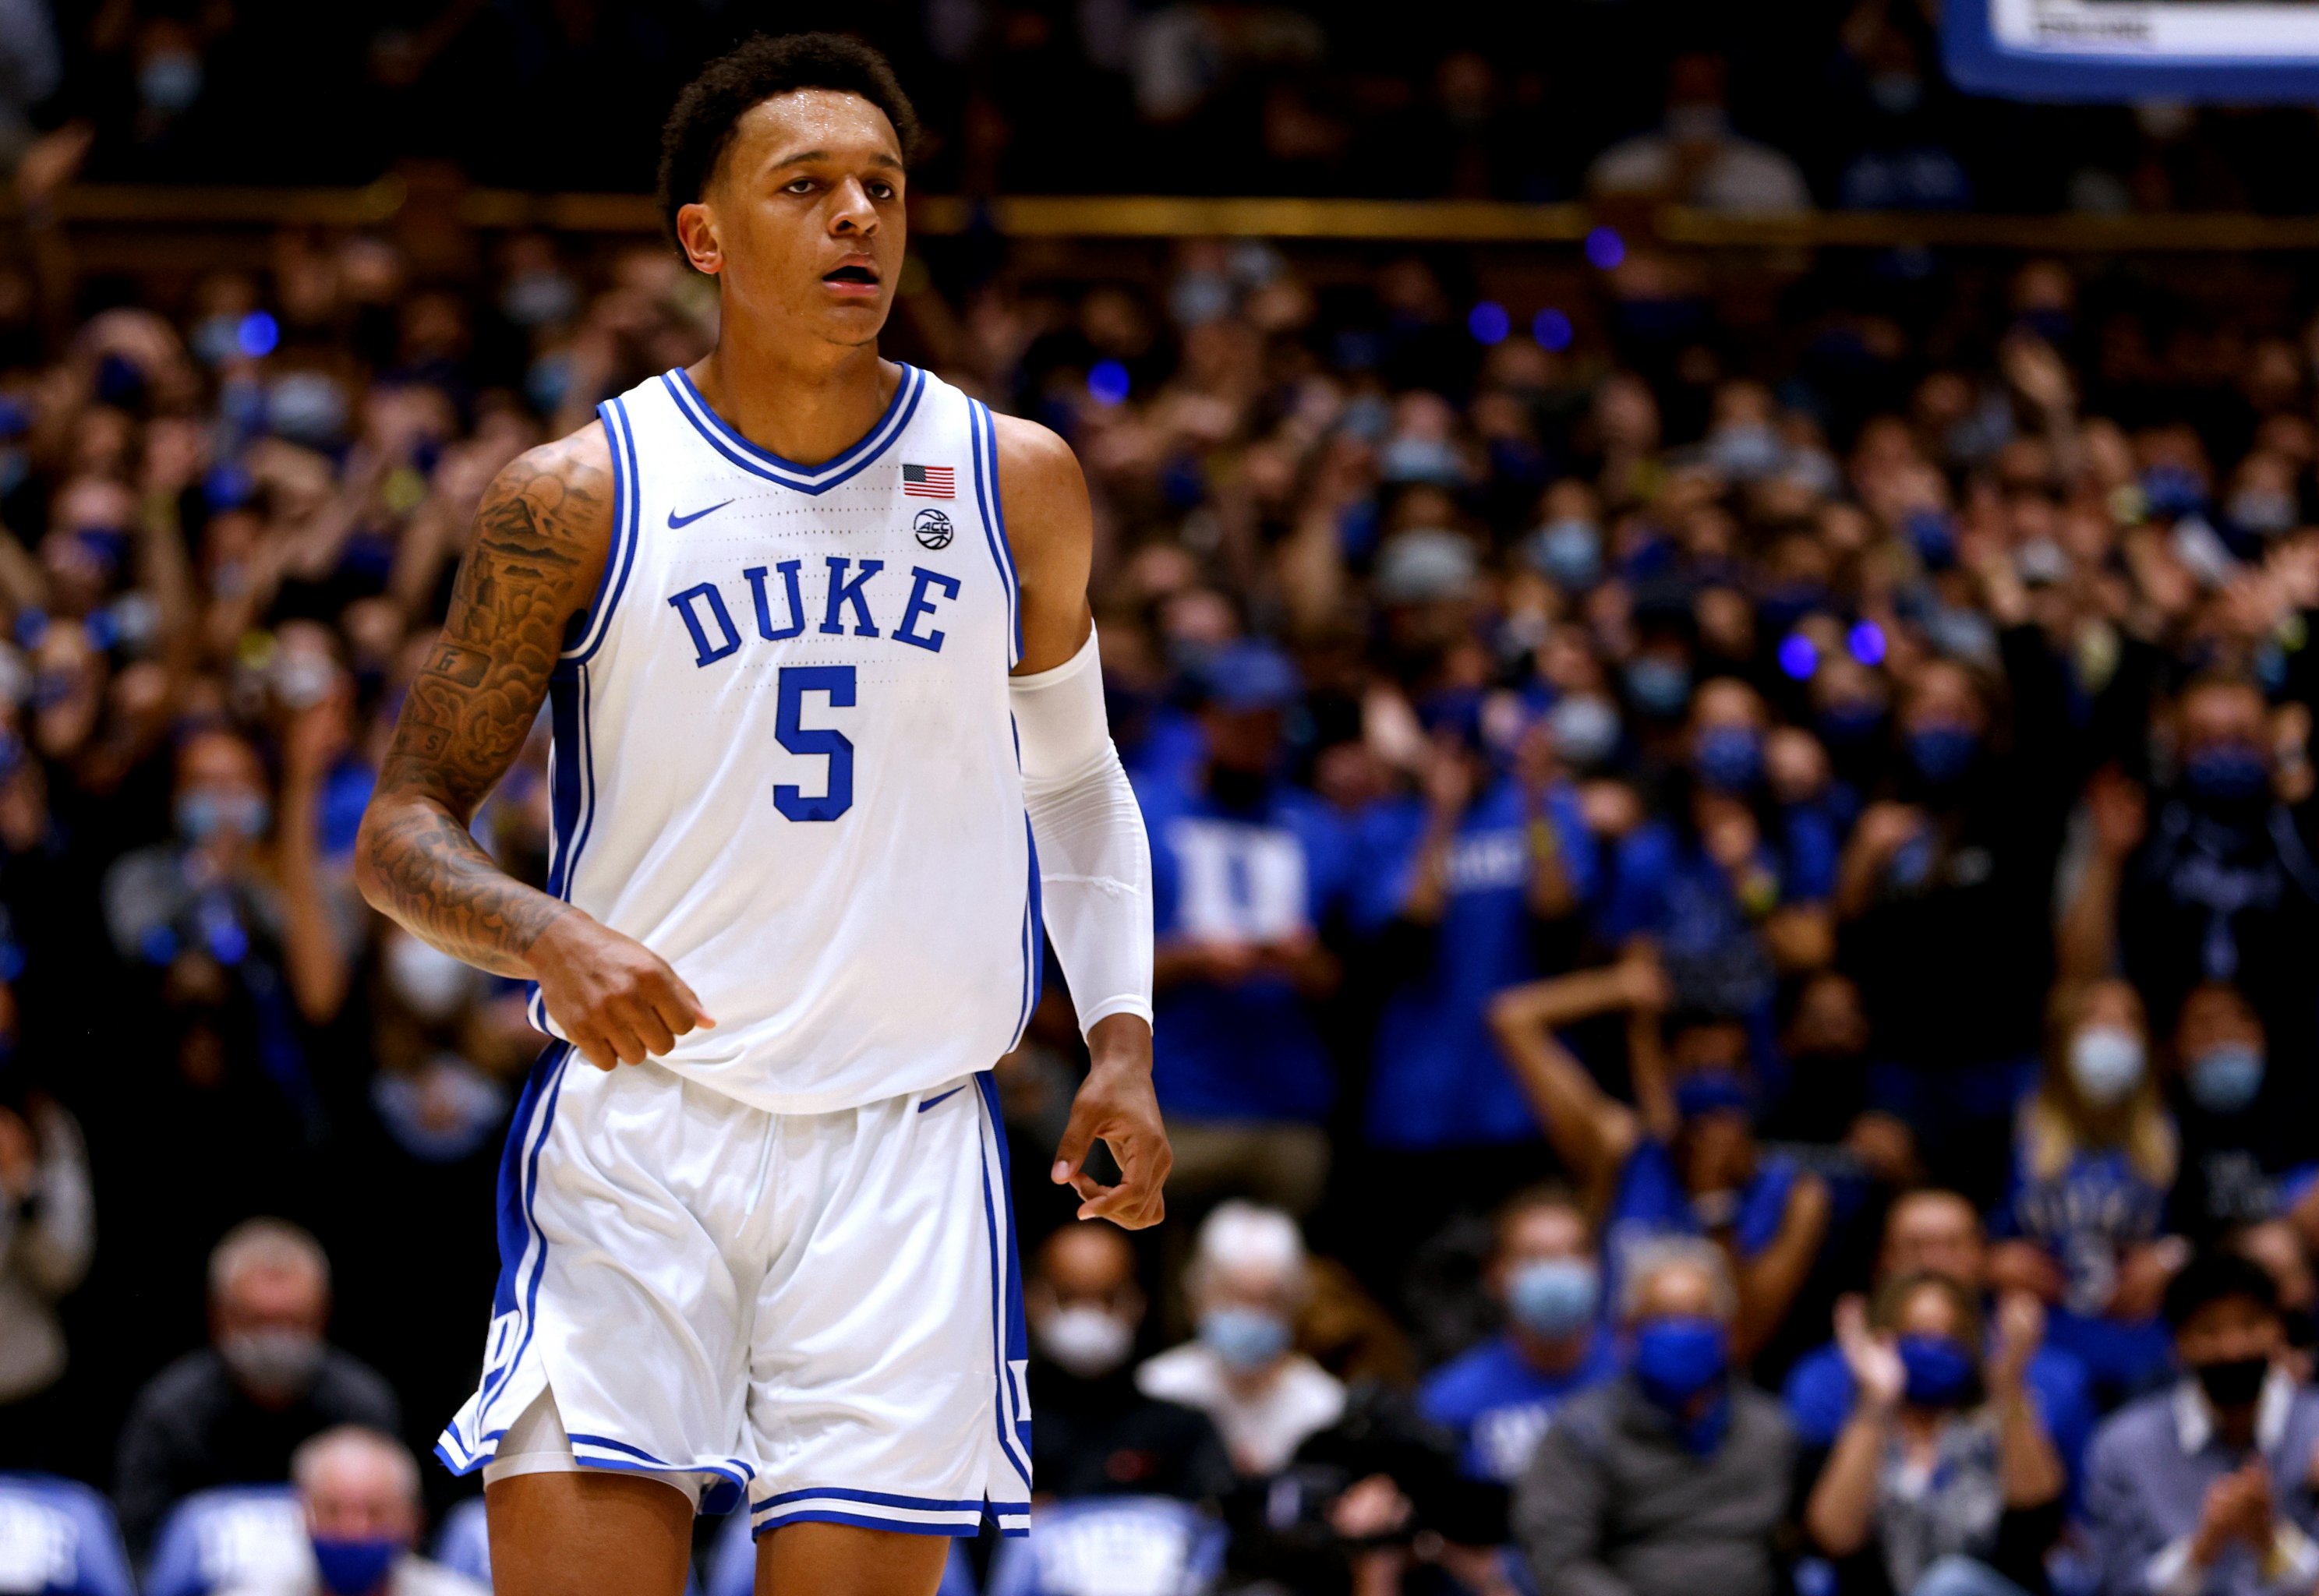 Duke's Paolo Banchero to Be Featured in NBA 2K22 Season 5: 'Power Within', News, Scores, Highlights, Stats, and Rumors